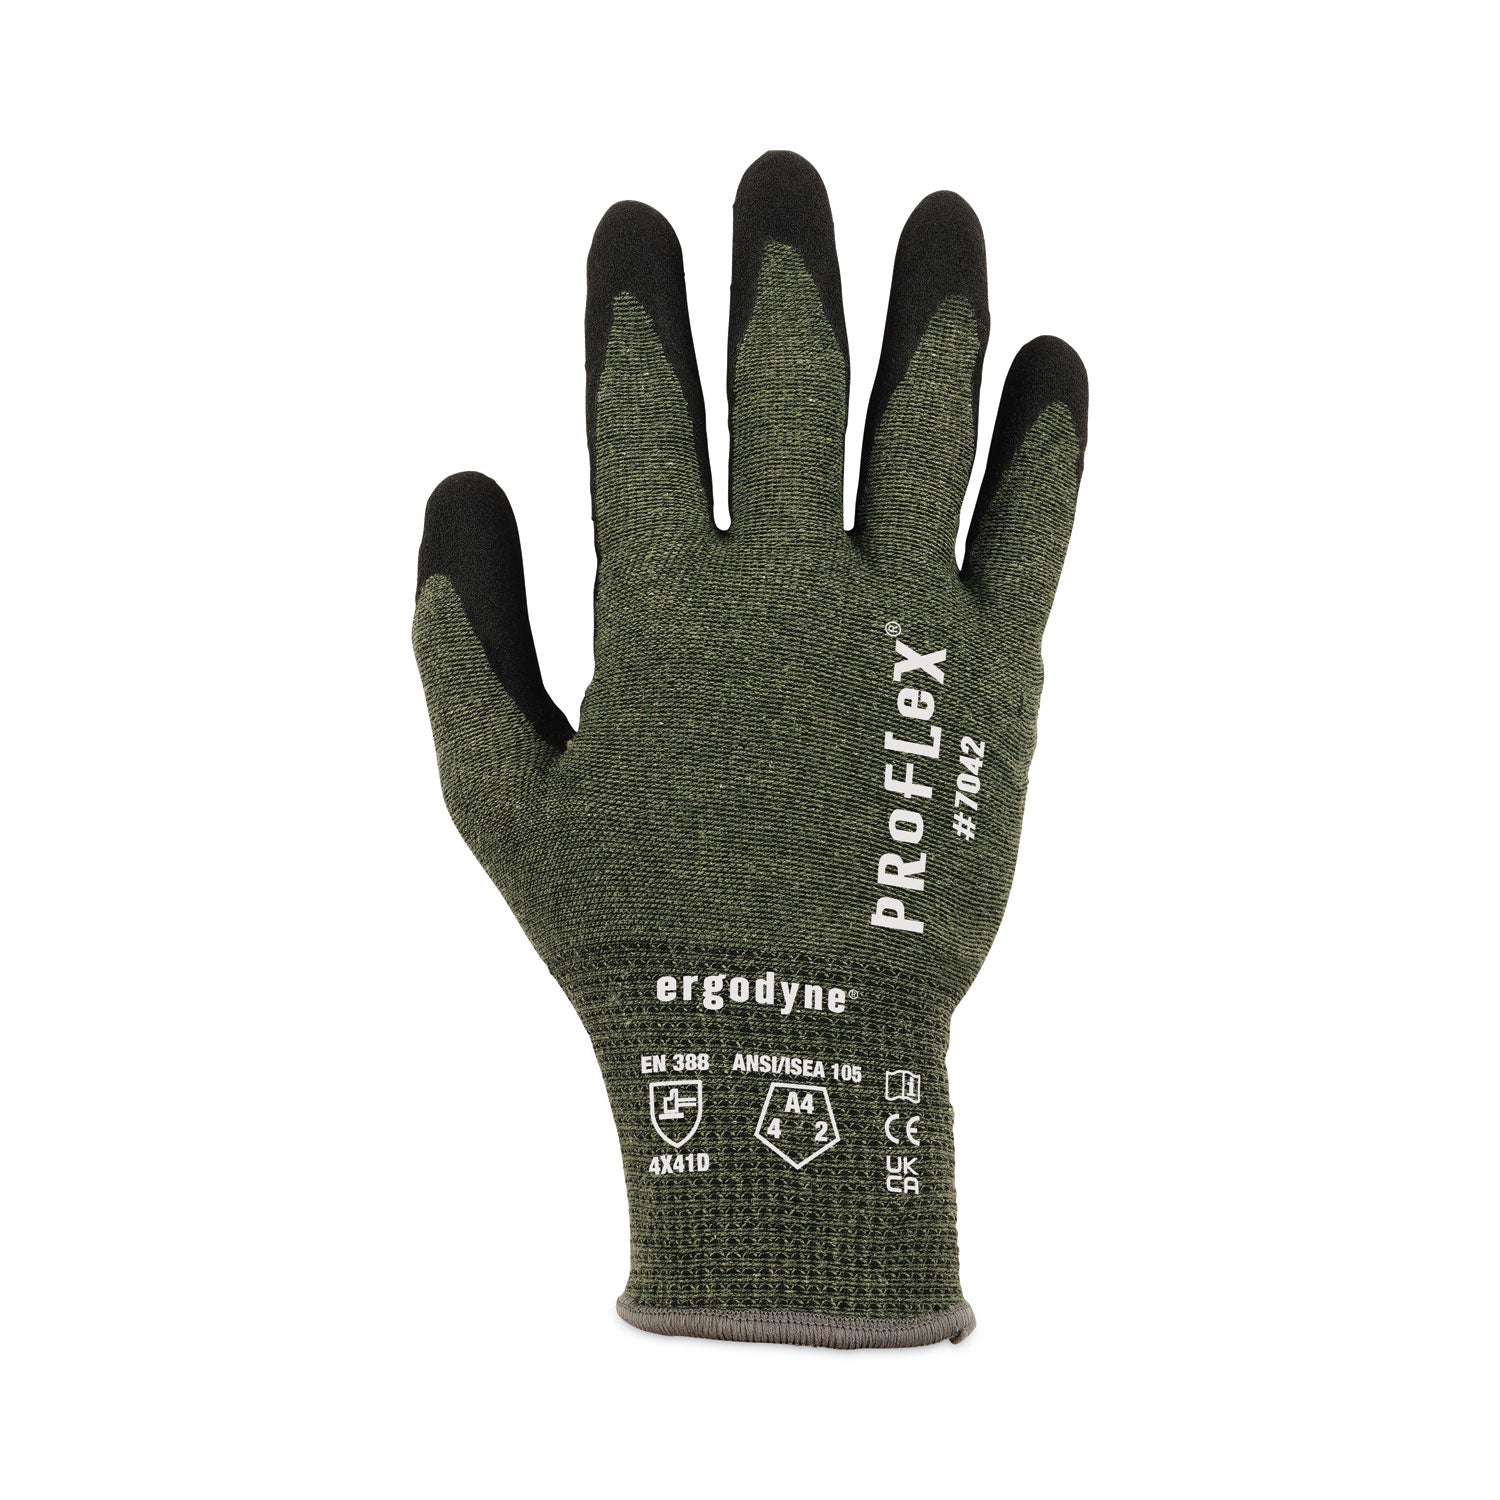 proflex-7042-ansi-a4-nitrile-coated-cr-gloves-green-small-12-pairs-pack-ships-in-1-3-business-days_ego10332 - 3